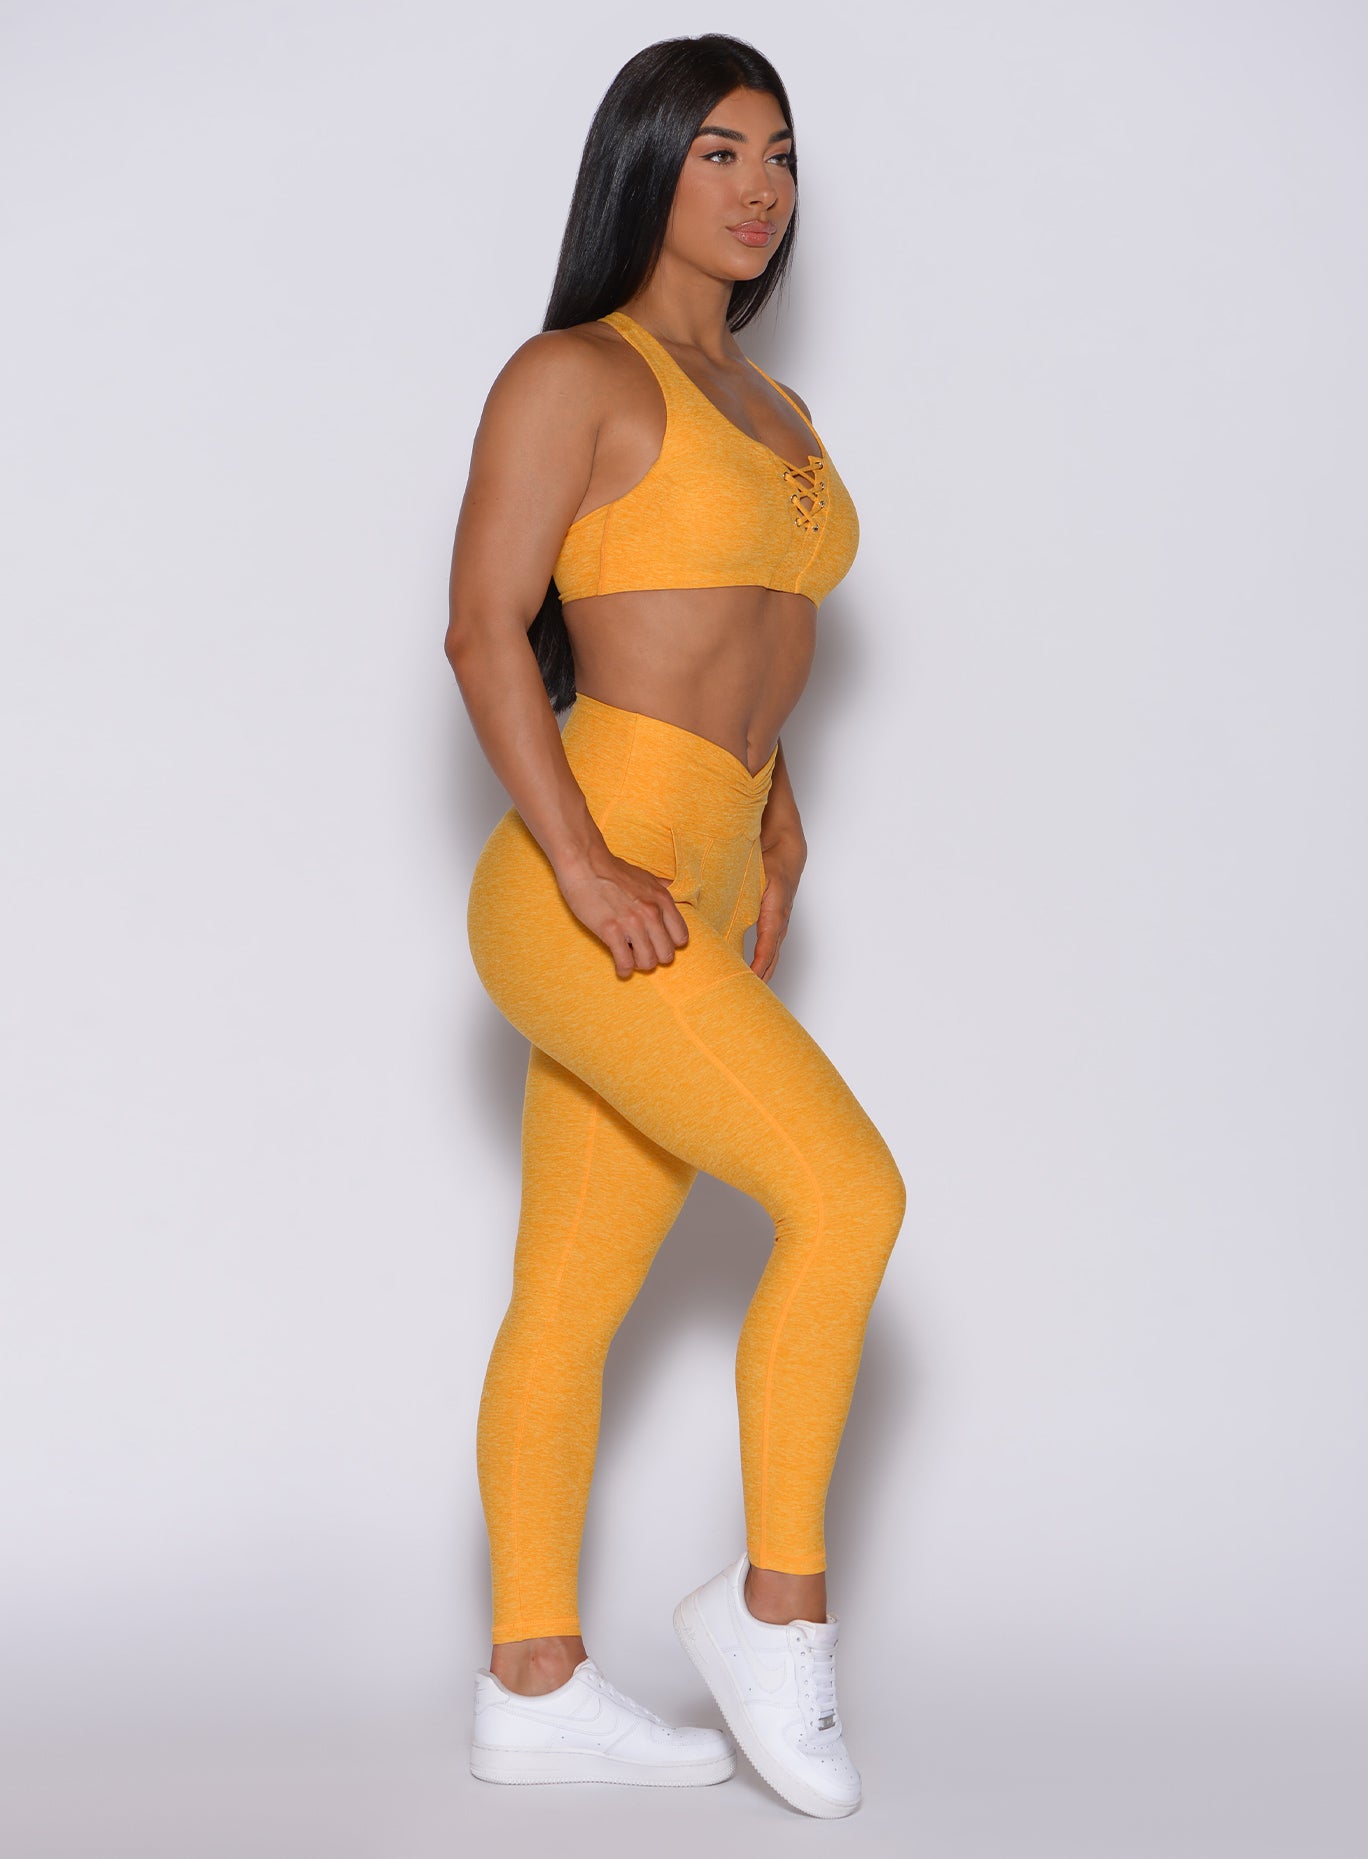 Right side profile view of a model in our V scrunch leggings in sinkissed color and a matching bra